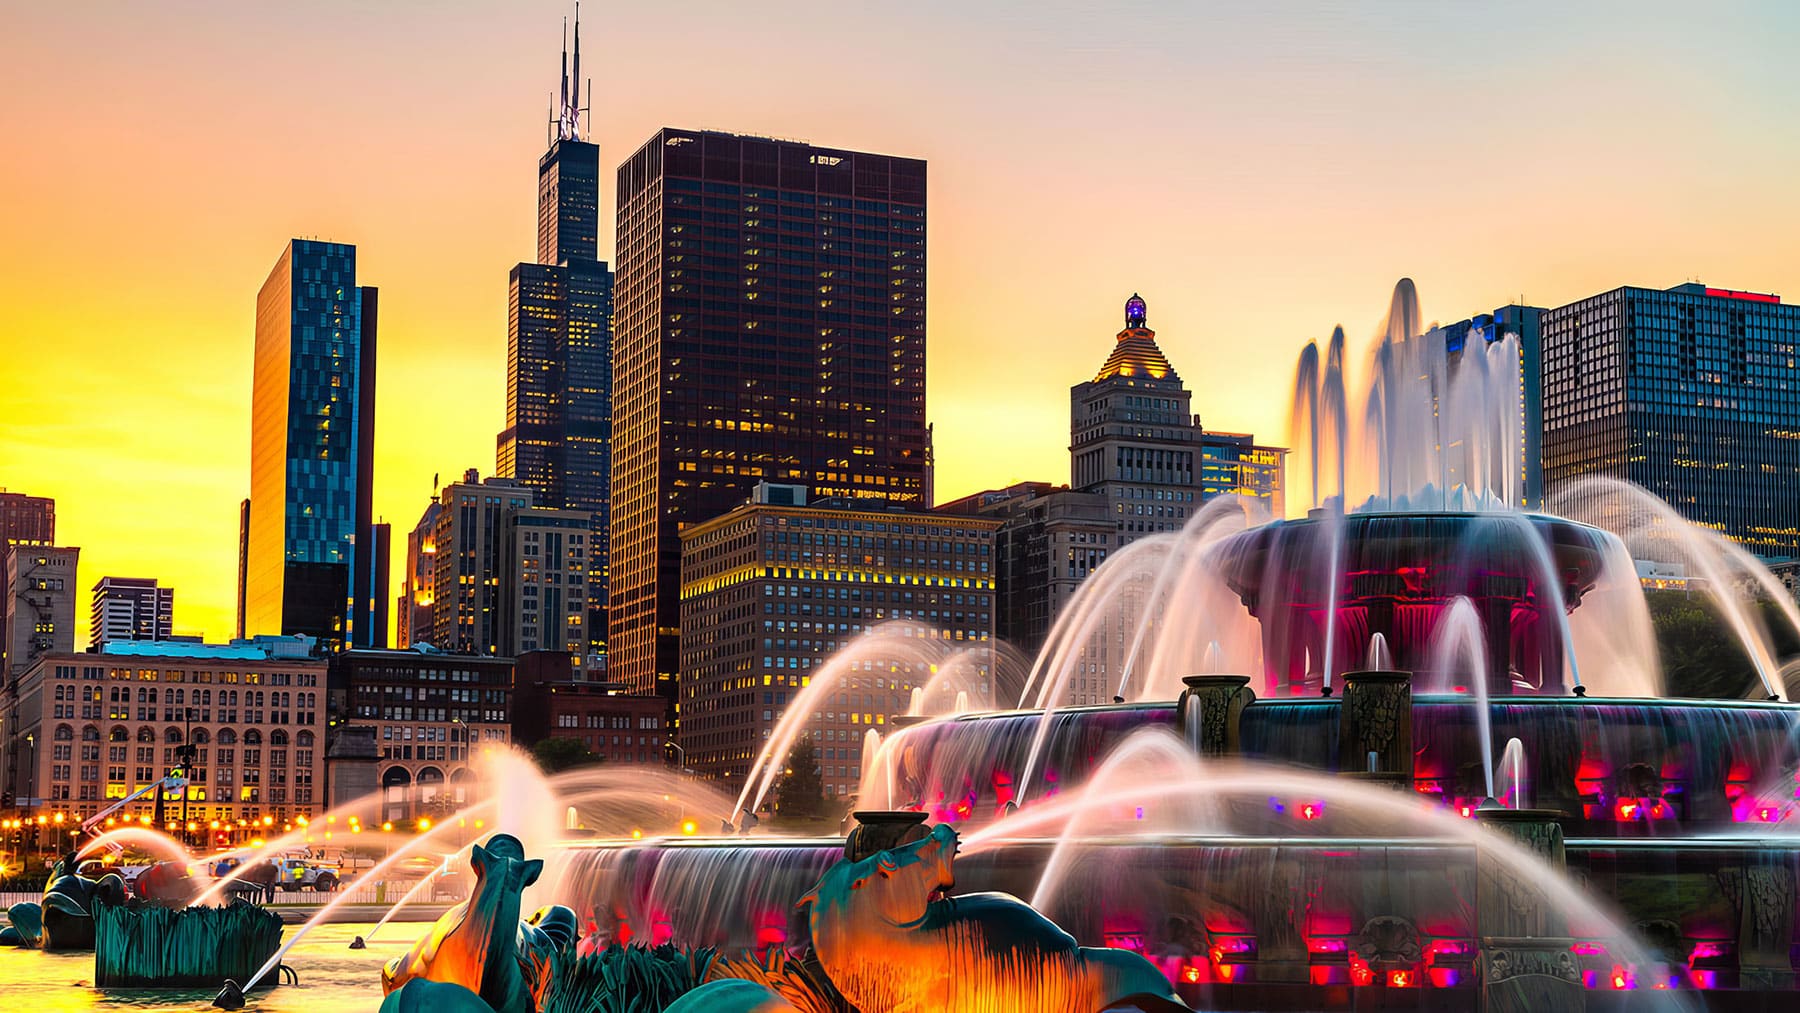 Buckingham Fountain in the foreground, with the Willis Tower and other downtown Chicago buildings in the background.